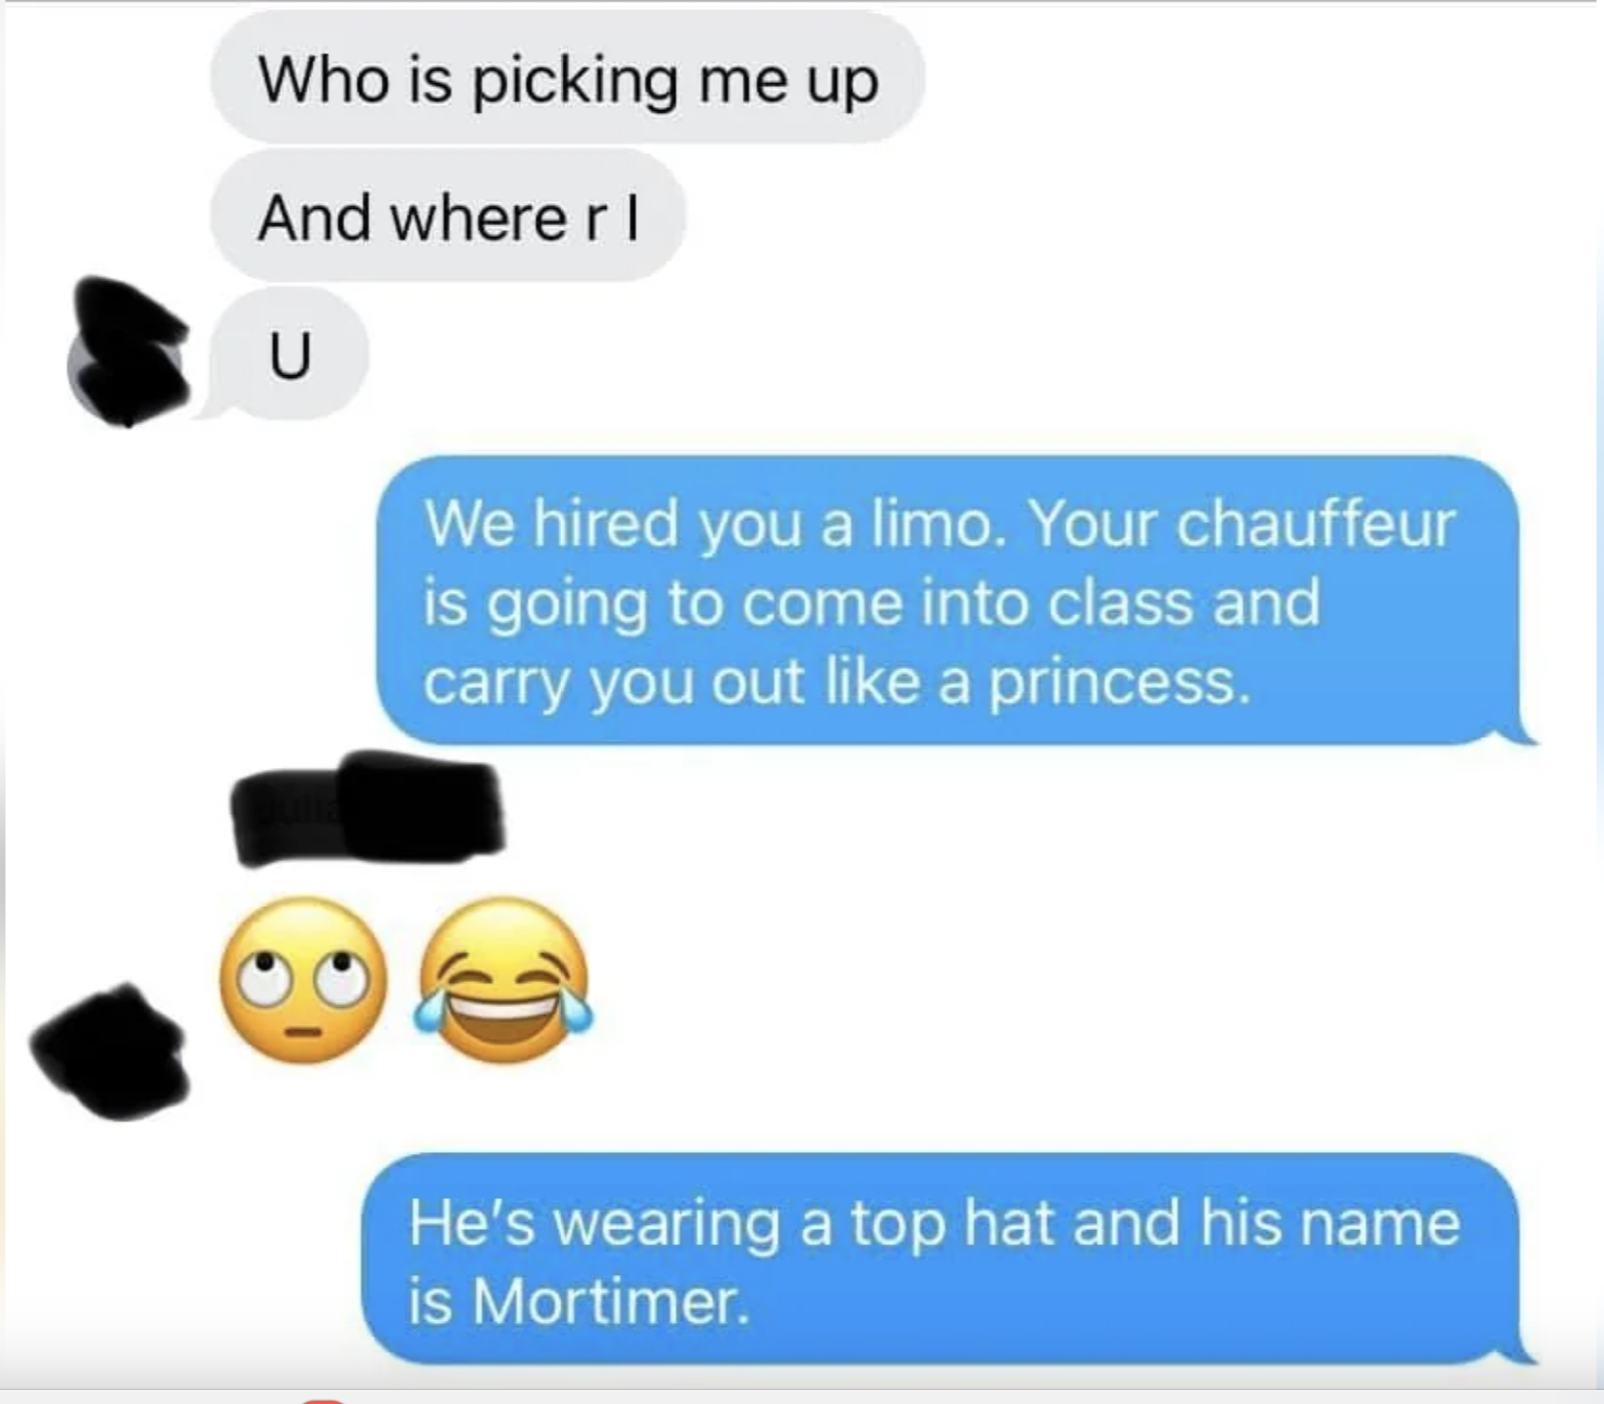 Text exchange: &quot;Who is picking me up&quot; &quot;And where r I&quot; blotted out. Response: &quot;We hired you a limo. Your chauffeur is going to come into class and carry you out like a princess.&quot; Emojis: eye-roll, laugh. &quot;He&#x27;s wearing a top hat and his name is Mortimer.&quot;